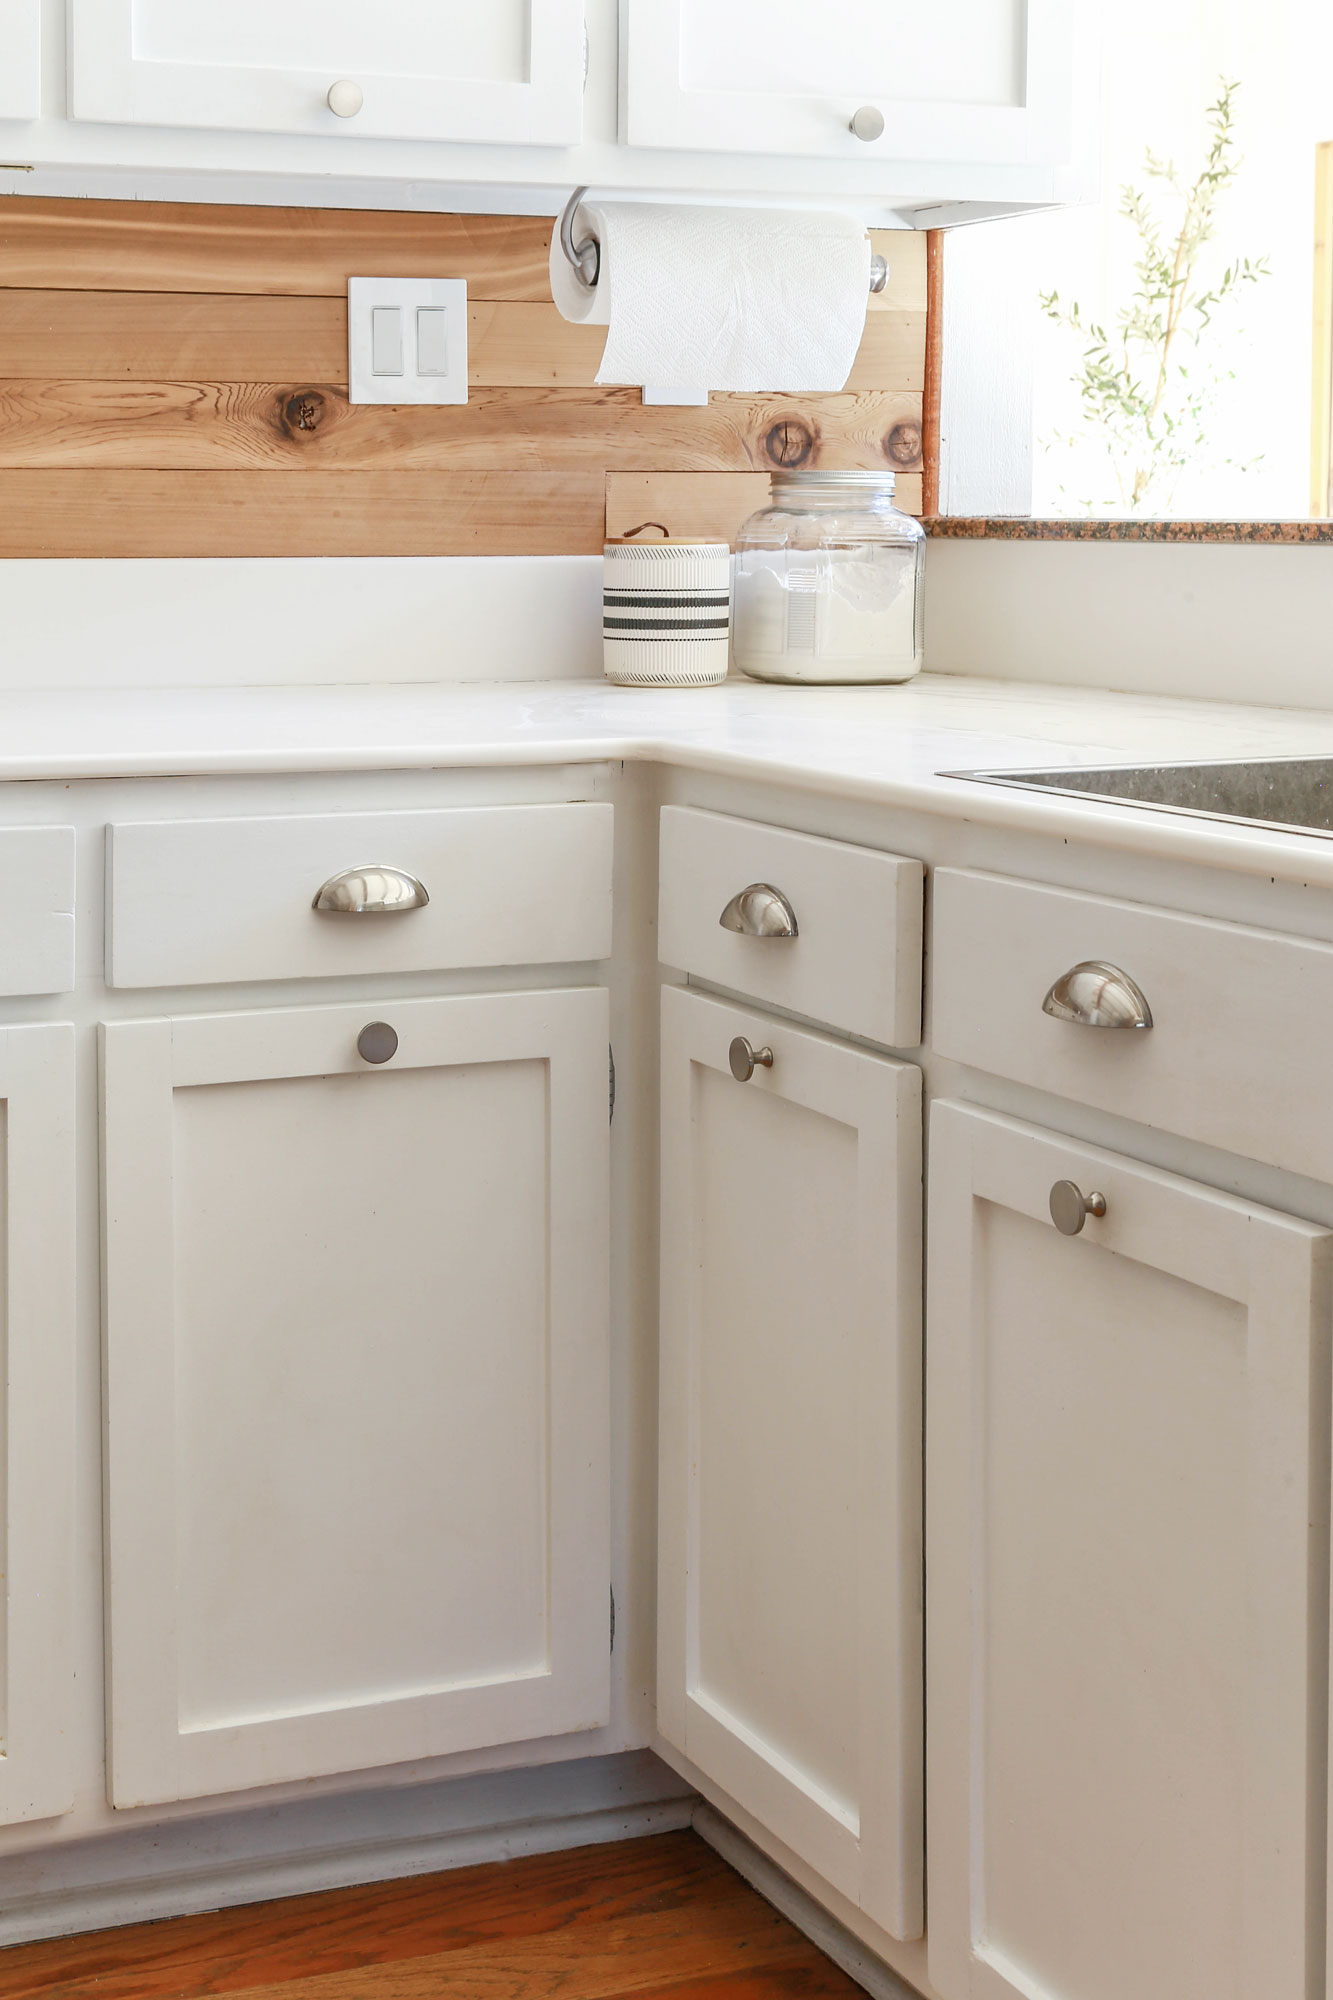 How to Build an Under-Cabinet Drawer (DIY)